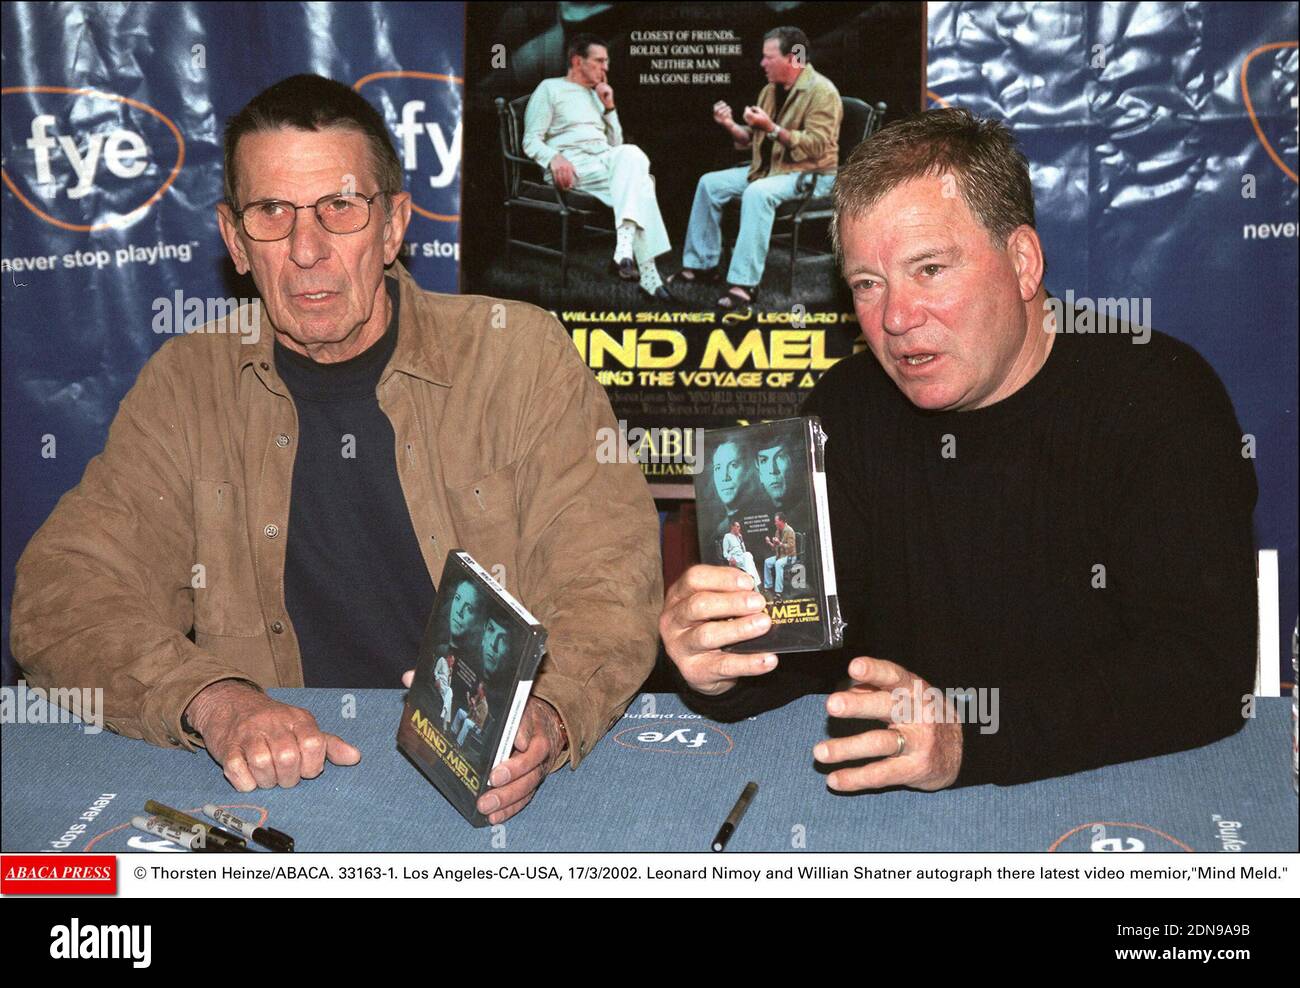 File photo : © Thorsten Heinze/ABACA. 33163-1. Los Angeles-CA-USA, 17/3/2002. Leonard Nimoy and Willian Shatner autograph there latest video memior,Mind Meld. US actor Leonard Nimoy, who played Mr Spock in the cult sci-fi series Star Trek, has died at the age of 83 in Los Angeles, his family has said. His son, Adam, said he died of end-stage chronic obstructive pulmonary disease on Friday morning. Stock Photo